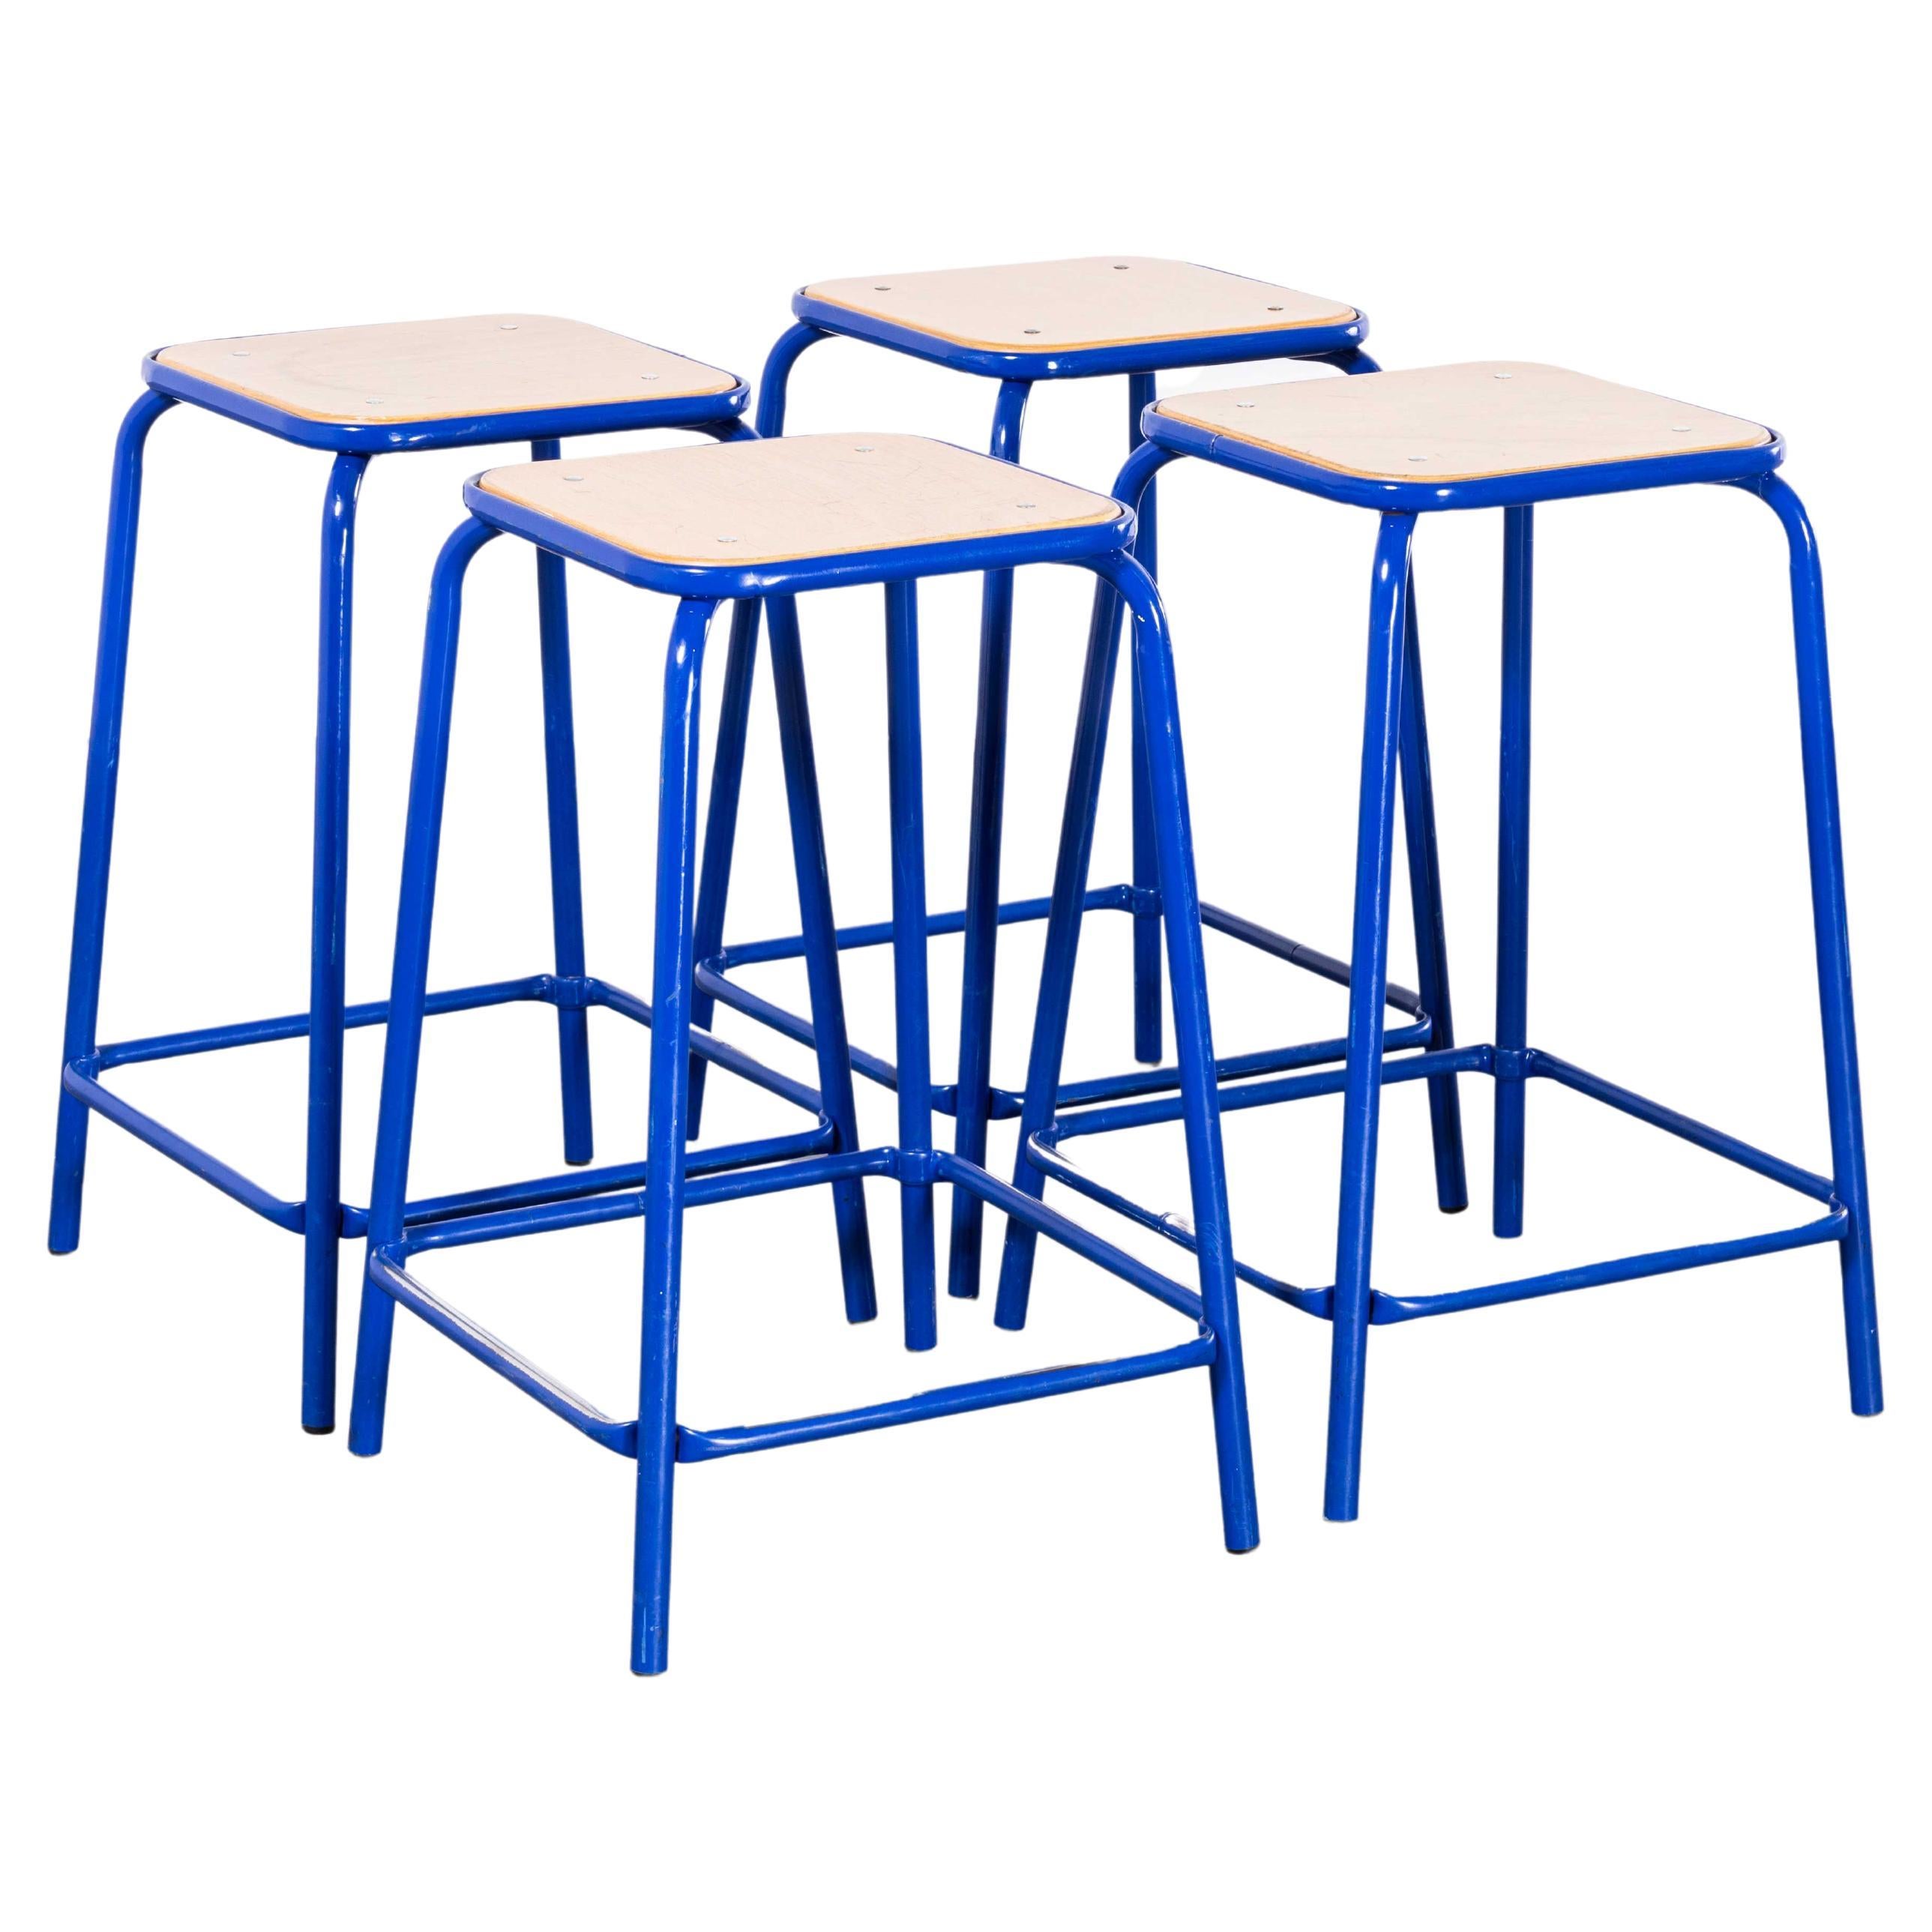 1970's French Bright Blue Laboratory Stools - Set Of Four For Sale